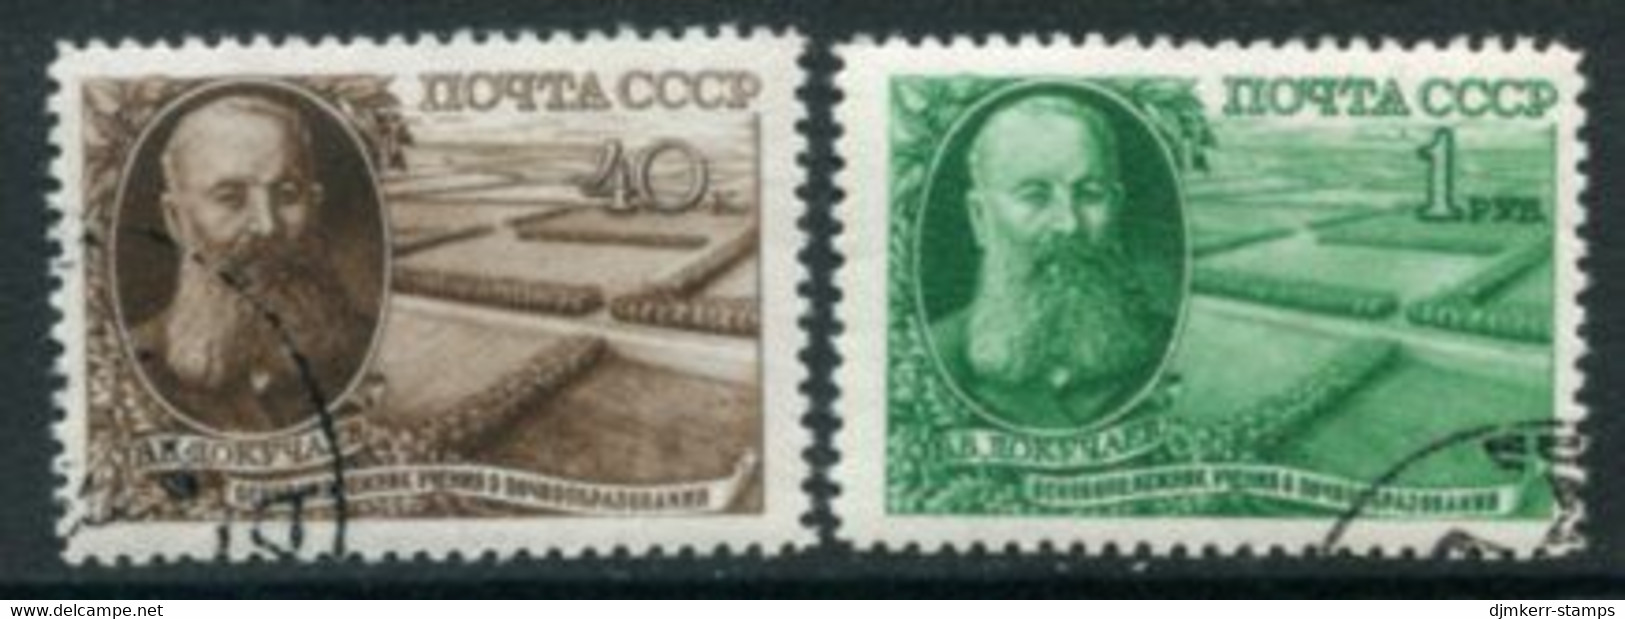 SOVIET UNION 1949 Dokuchaev, Soil Researcher Used.  Michel 1365-66 - Used Stamps